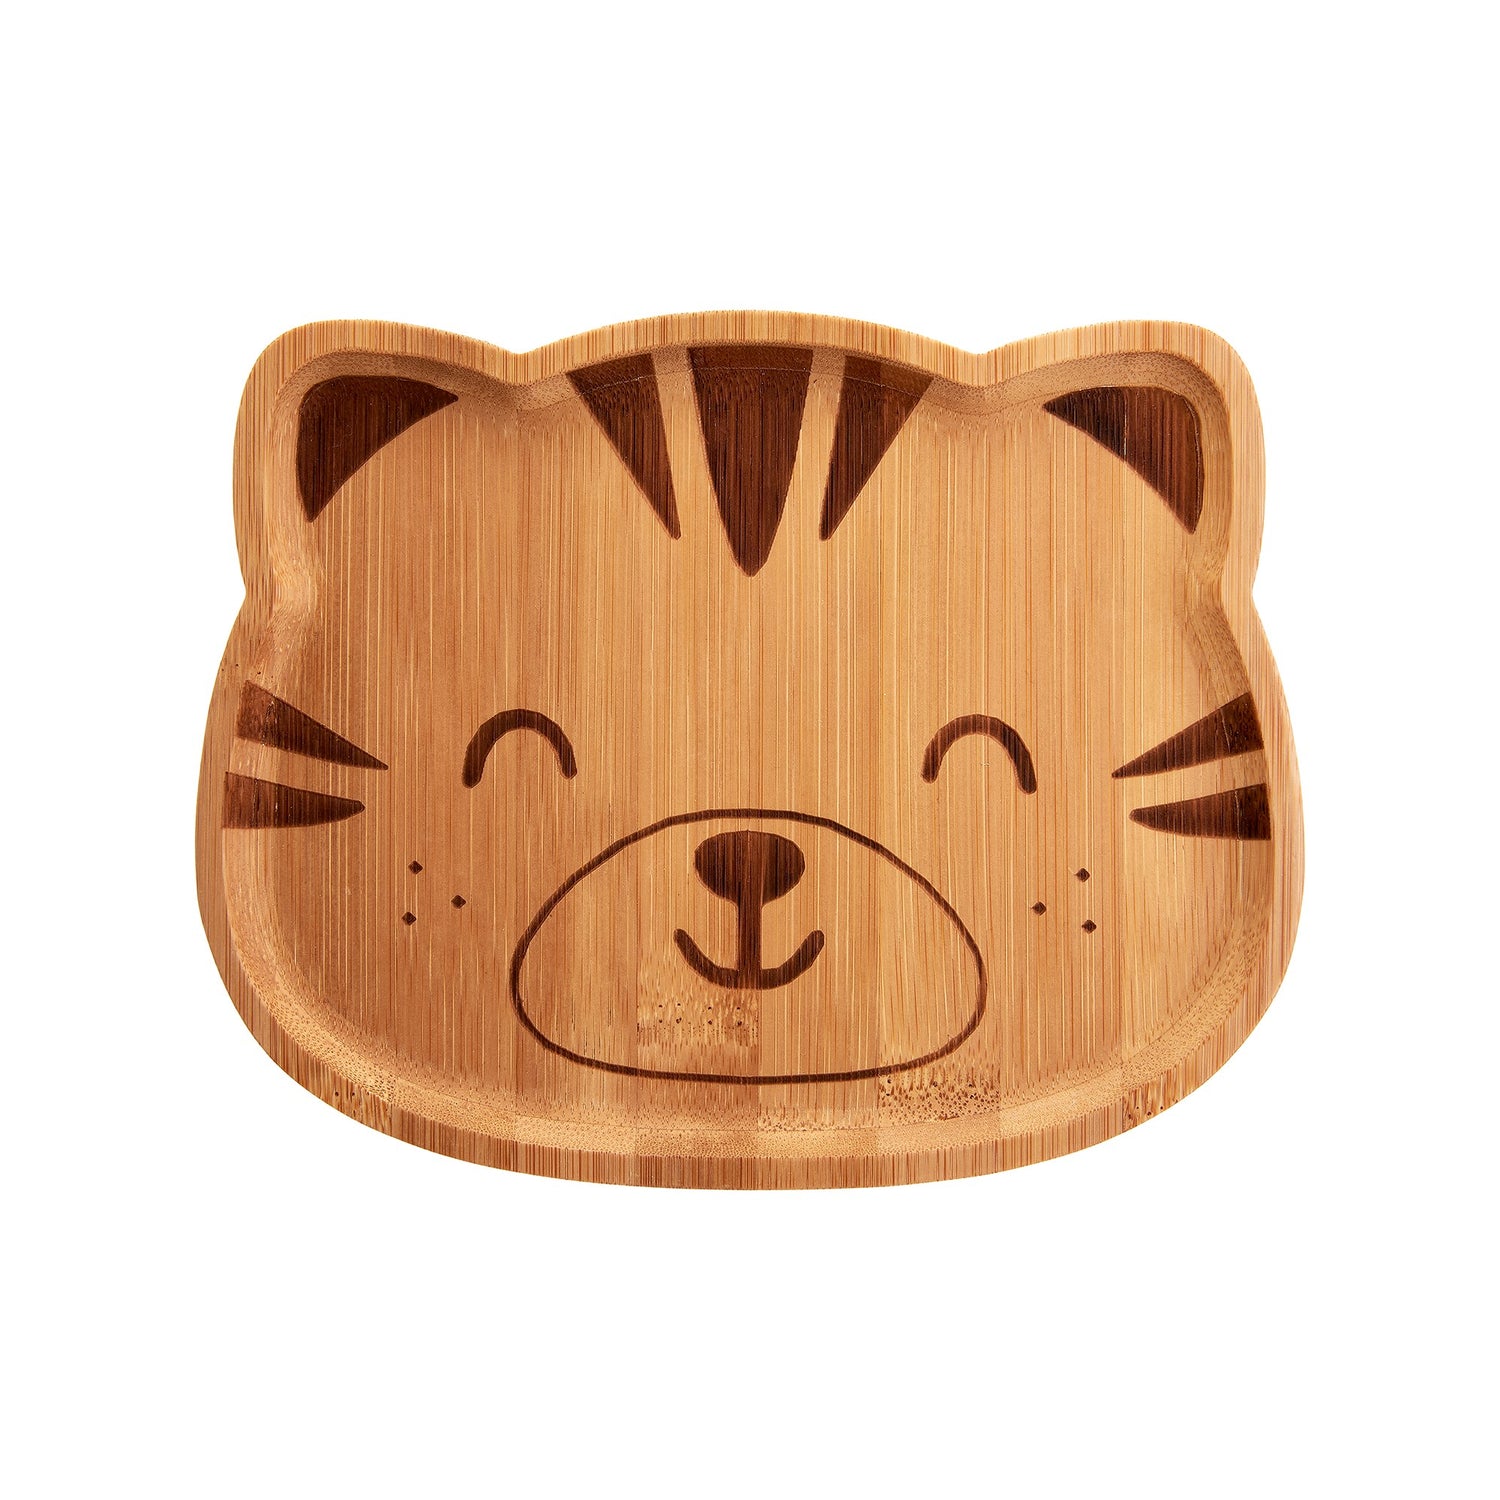 Embrace the wild with this planet-friendly bamboo plate featuring a cute tiger design.